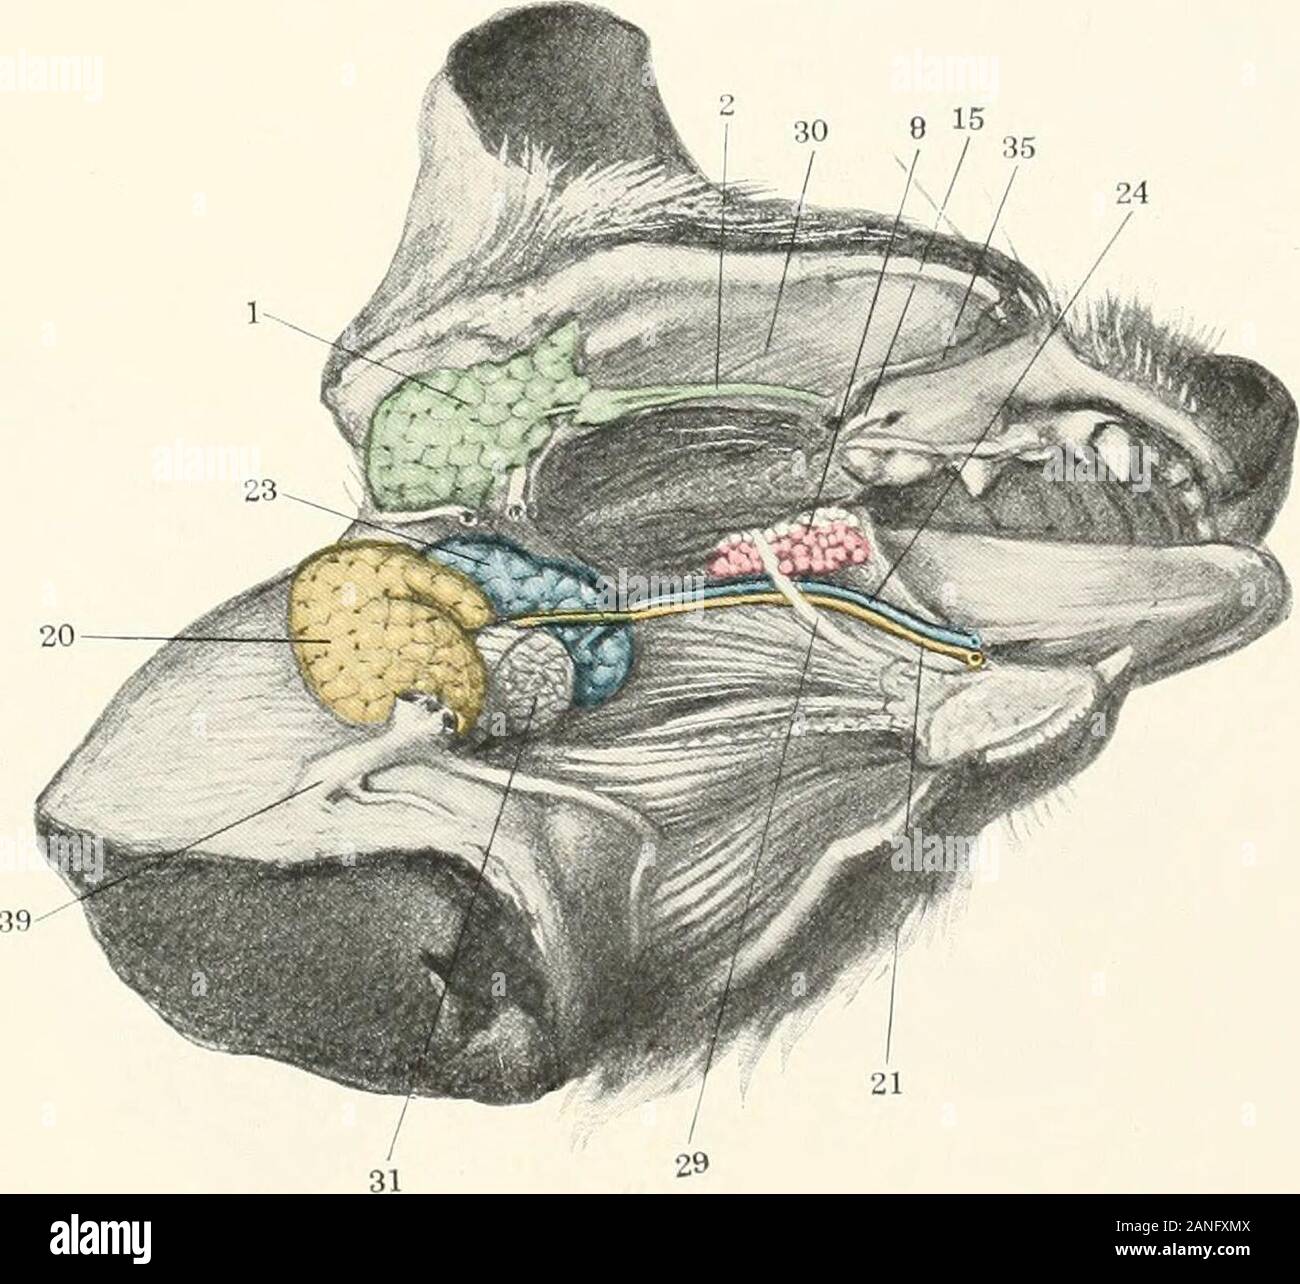 Contributions to the anatomy and development of the salivary glands in the mammalia . Fig. 3.. Fig. 4- PtATE XXXI Fig. 6, Felis leo,?. Morphological Museum of Princeton University. No. 1471. Fig. 7. Canis familiaris. Morphological Museum of Columbia University,No. 4060. /. Parotid gland. 2. Parotid duct. J. Parotid orifice. 5. Outlying lobules of the ventral angle of the parotid gland. p. Orbital glands. 70. Orifice of first orbital gland. 75. Stomal ridge. 16. Inferior alveobuccal glands. 18. Lesser sublingual glands. 20. Submaxillary gland. 27. Submaxillary duct. 2j Greater sublingual glan Stock Photo